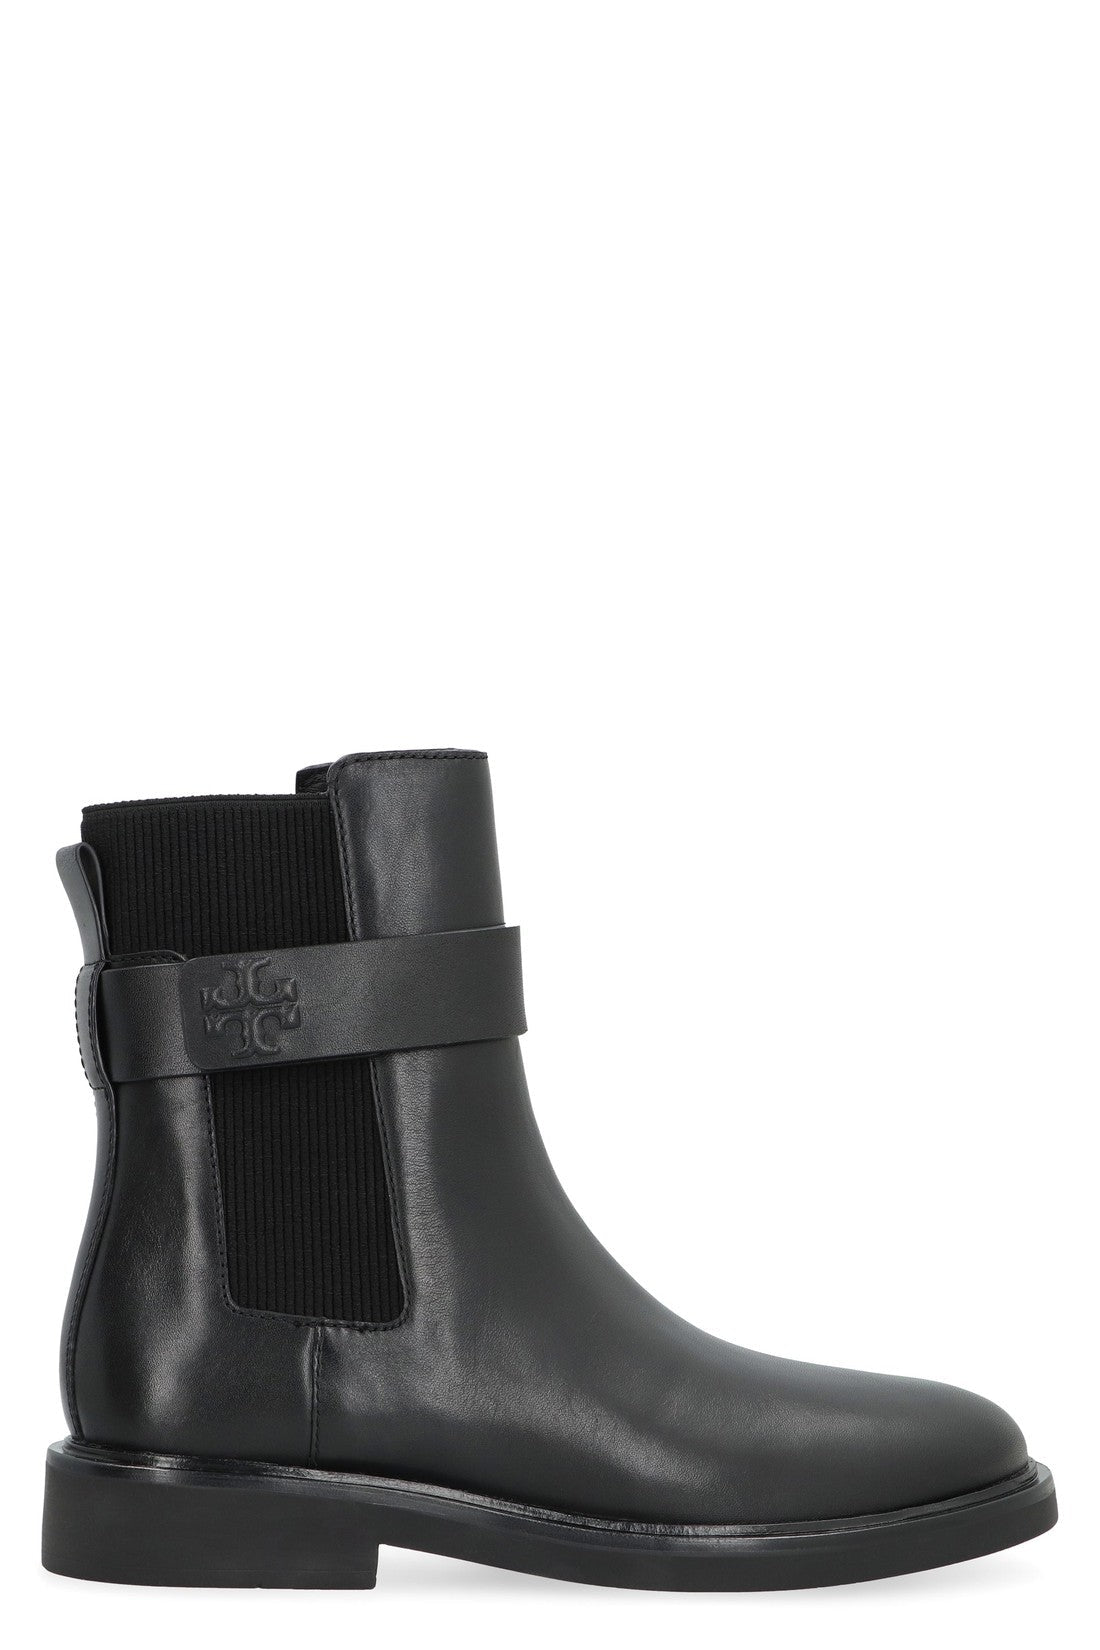 Tory Burch-OUTLET-SALE-Leather Chelsea boots-ARCHIVIST